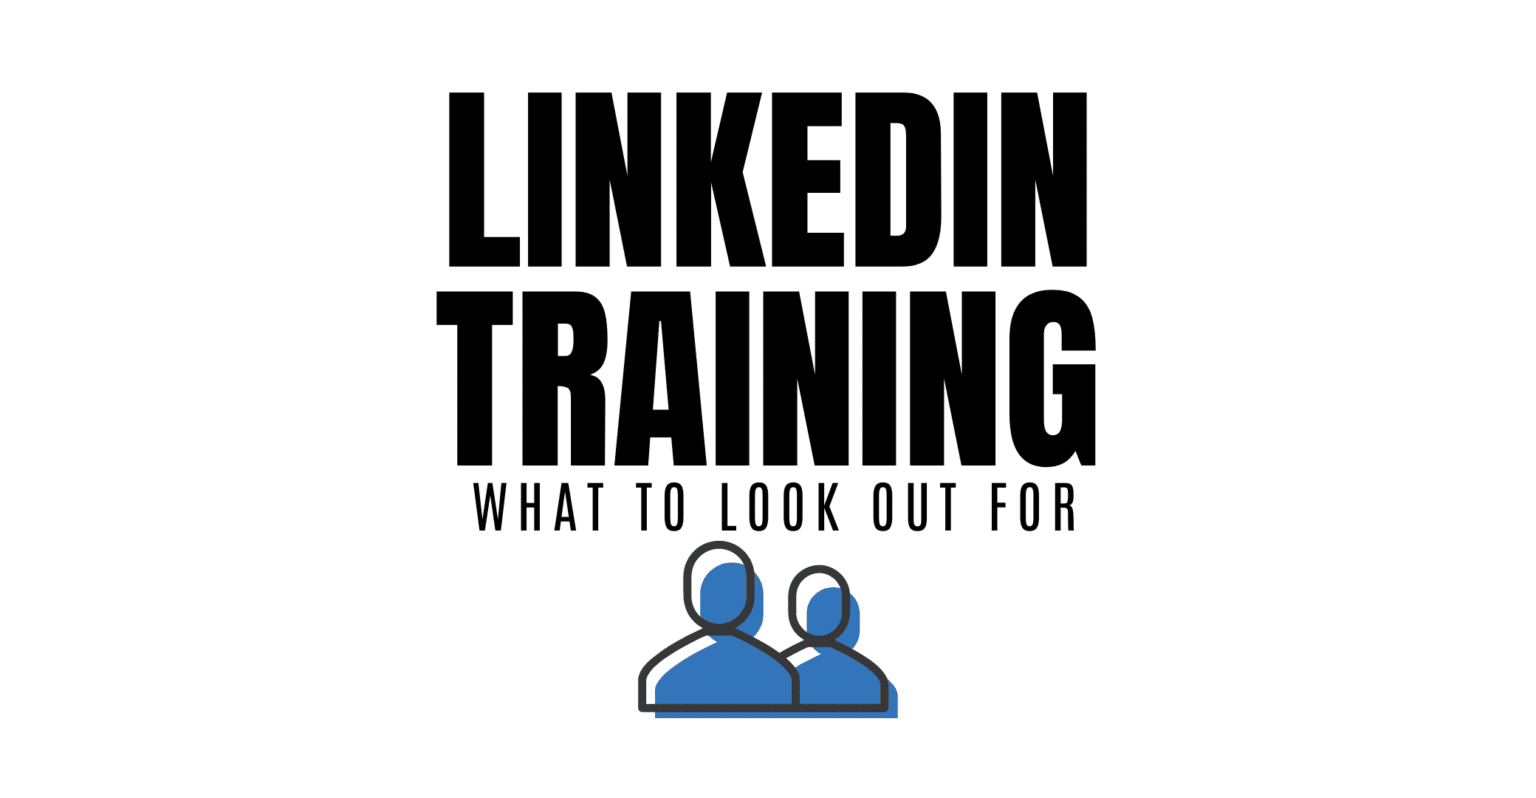 LinkedIn Training: What To Look Out For featured image